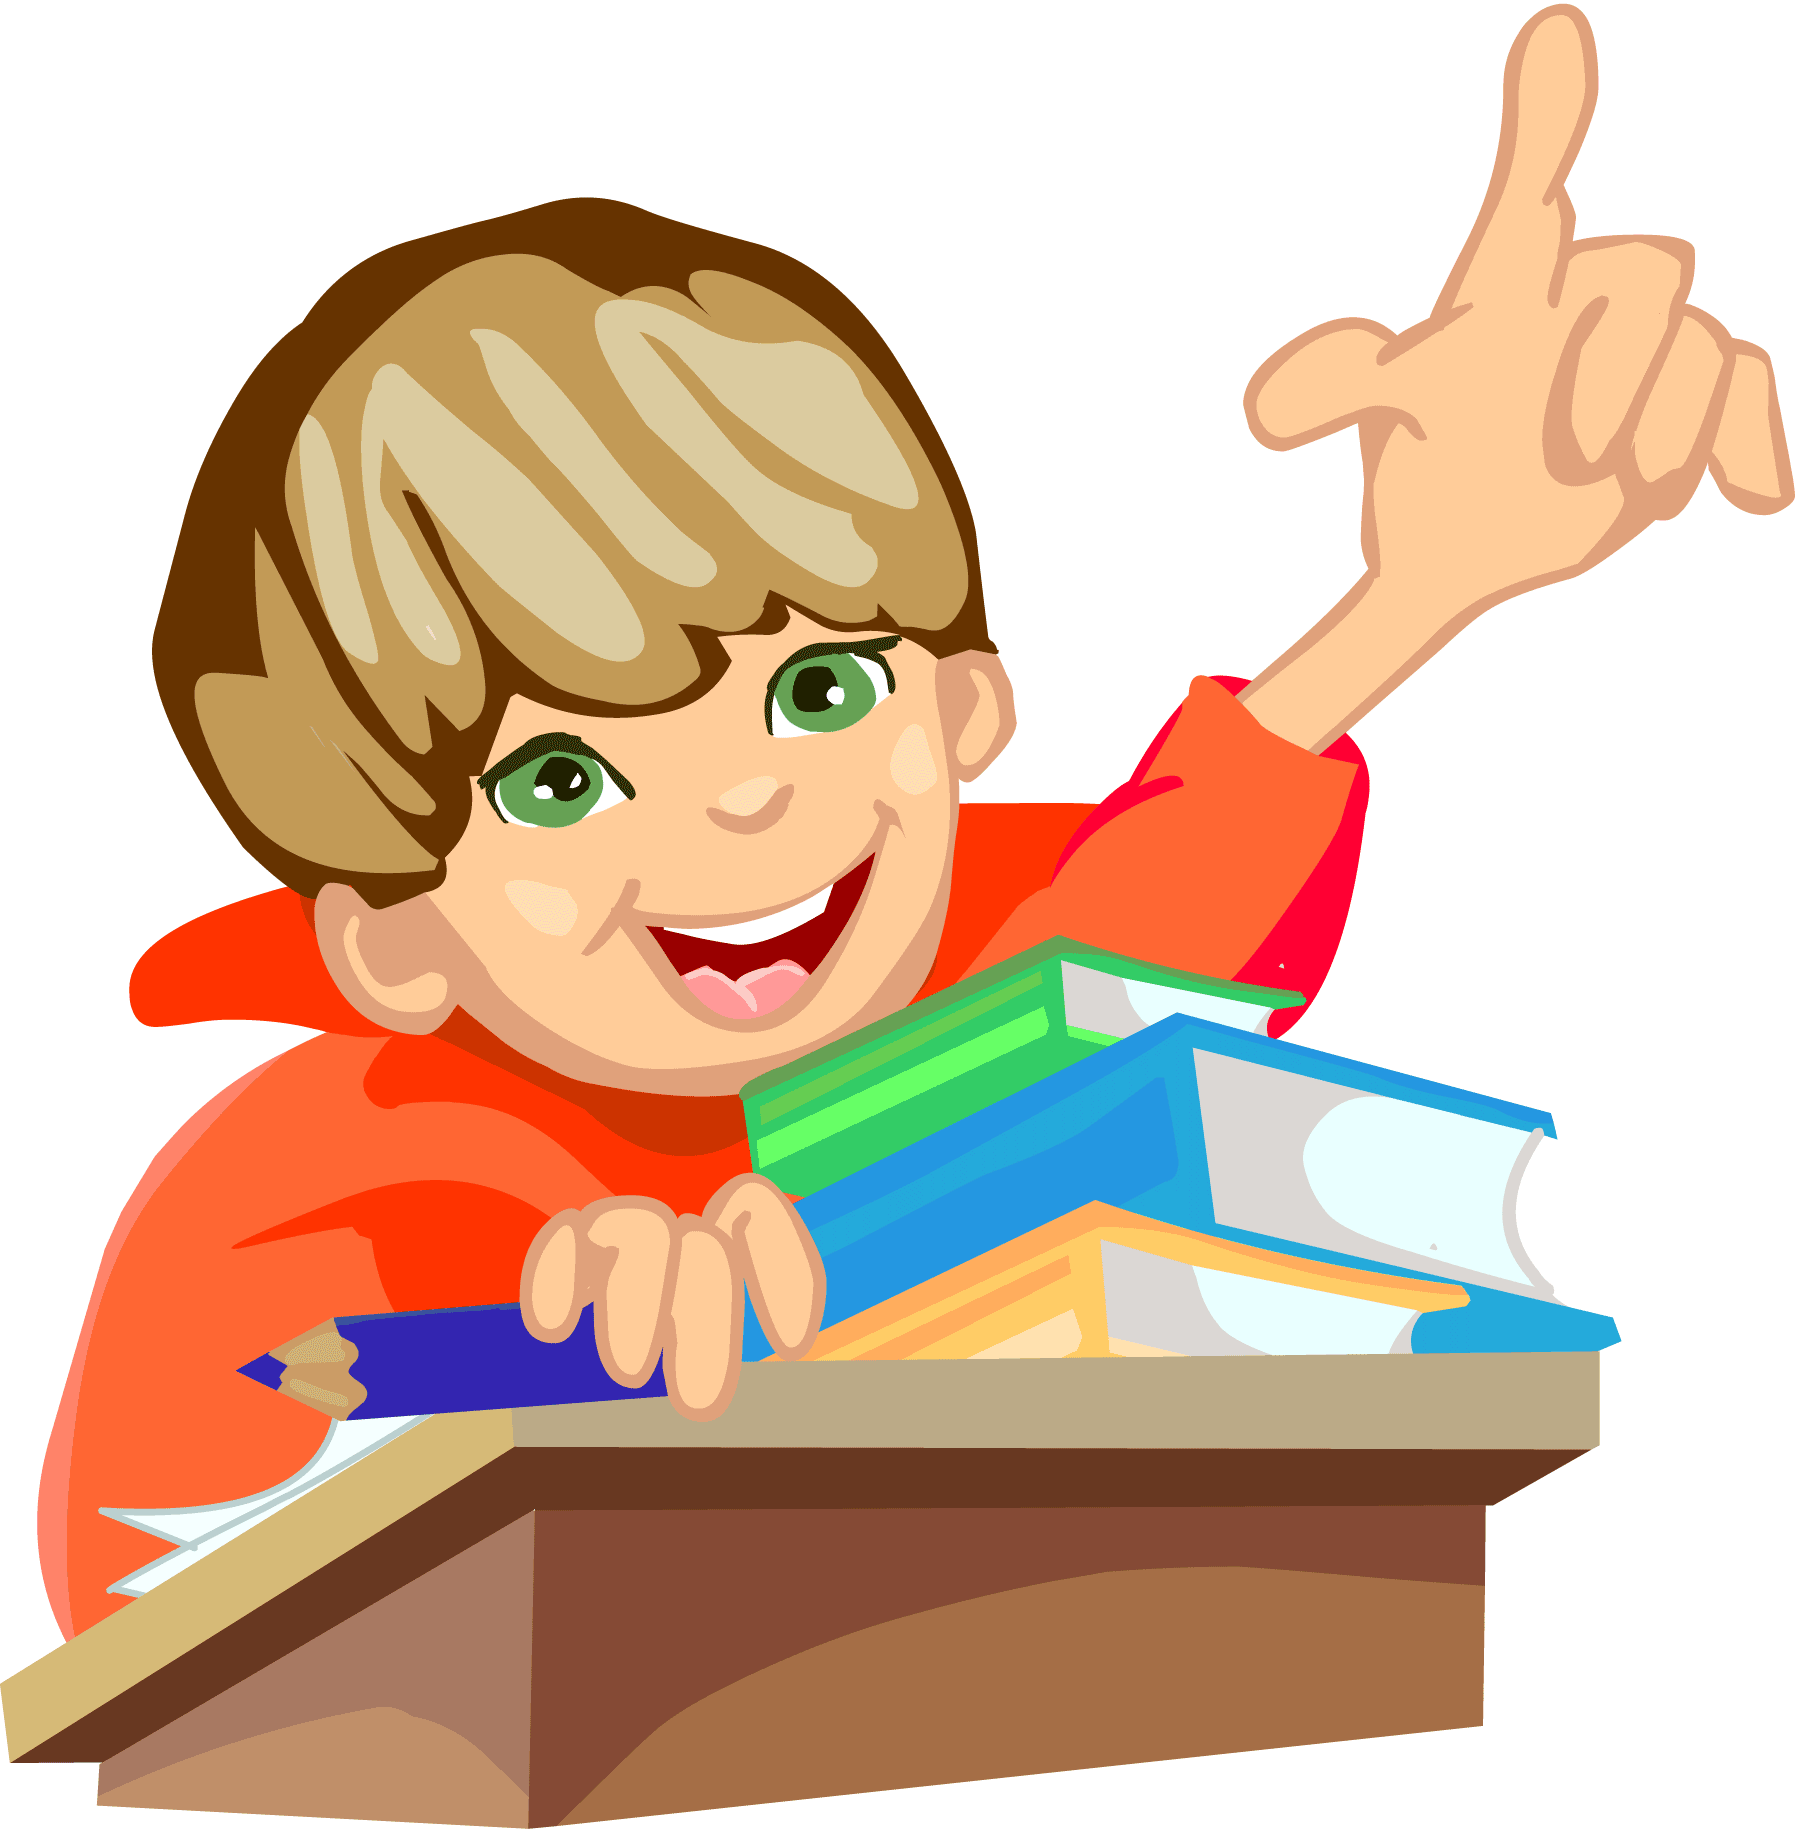 Classroom Clipart For Free | Clipart library - Free Clipart Images